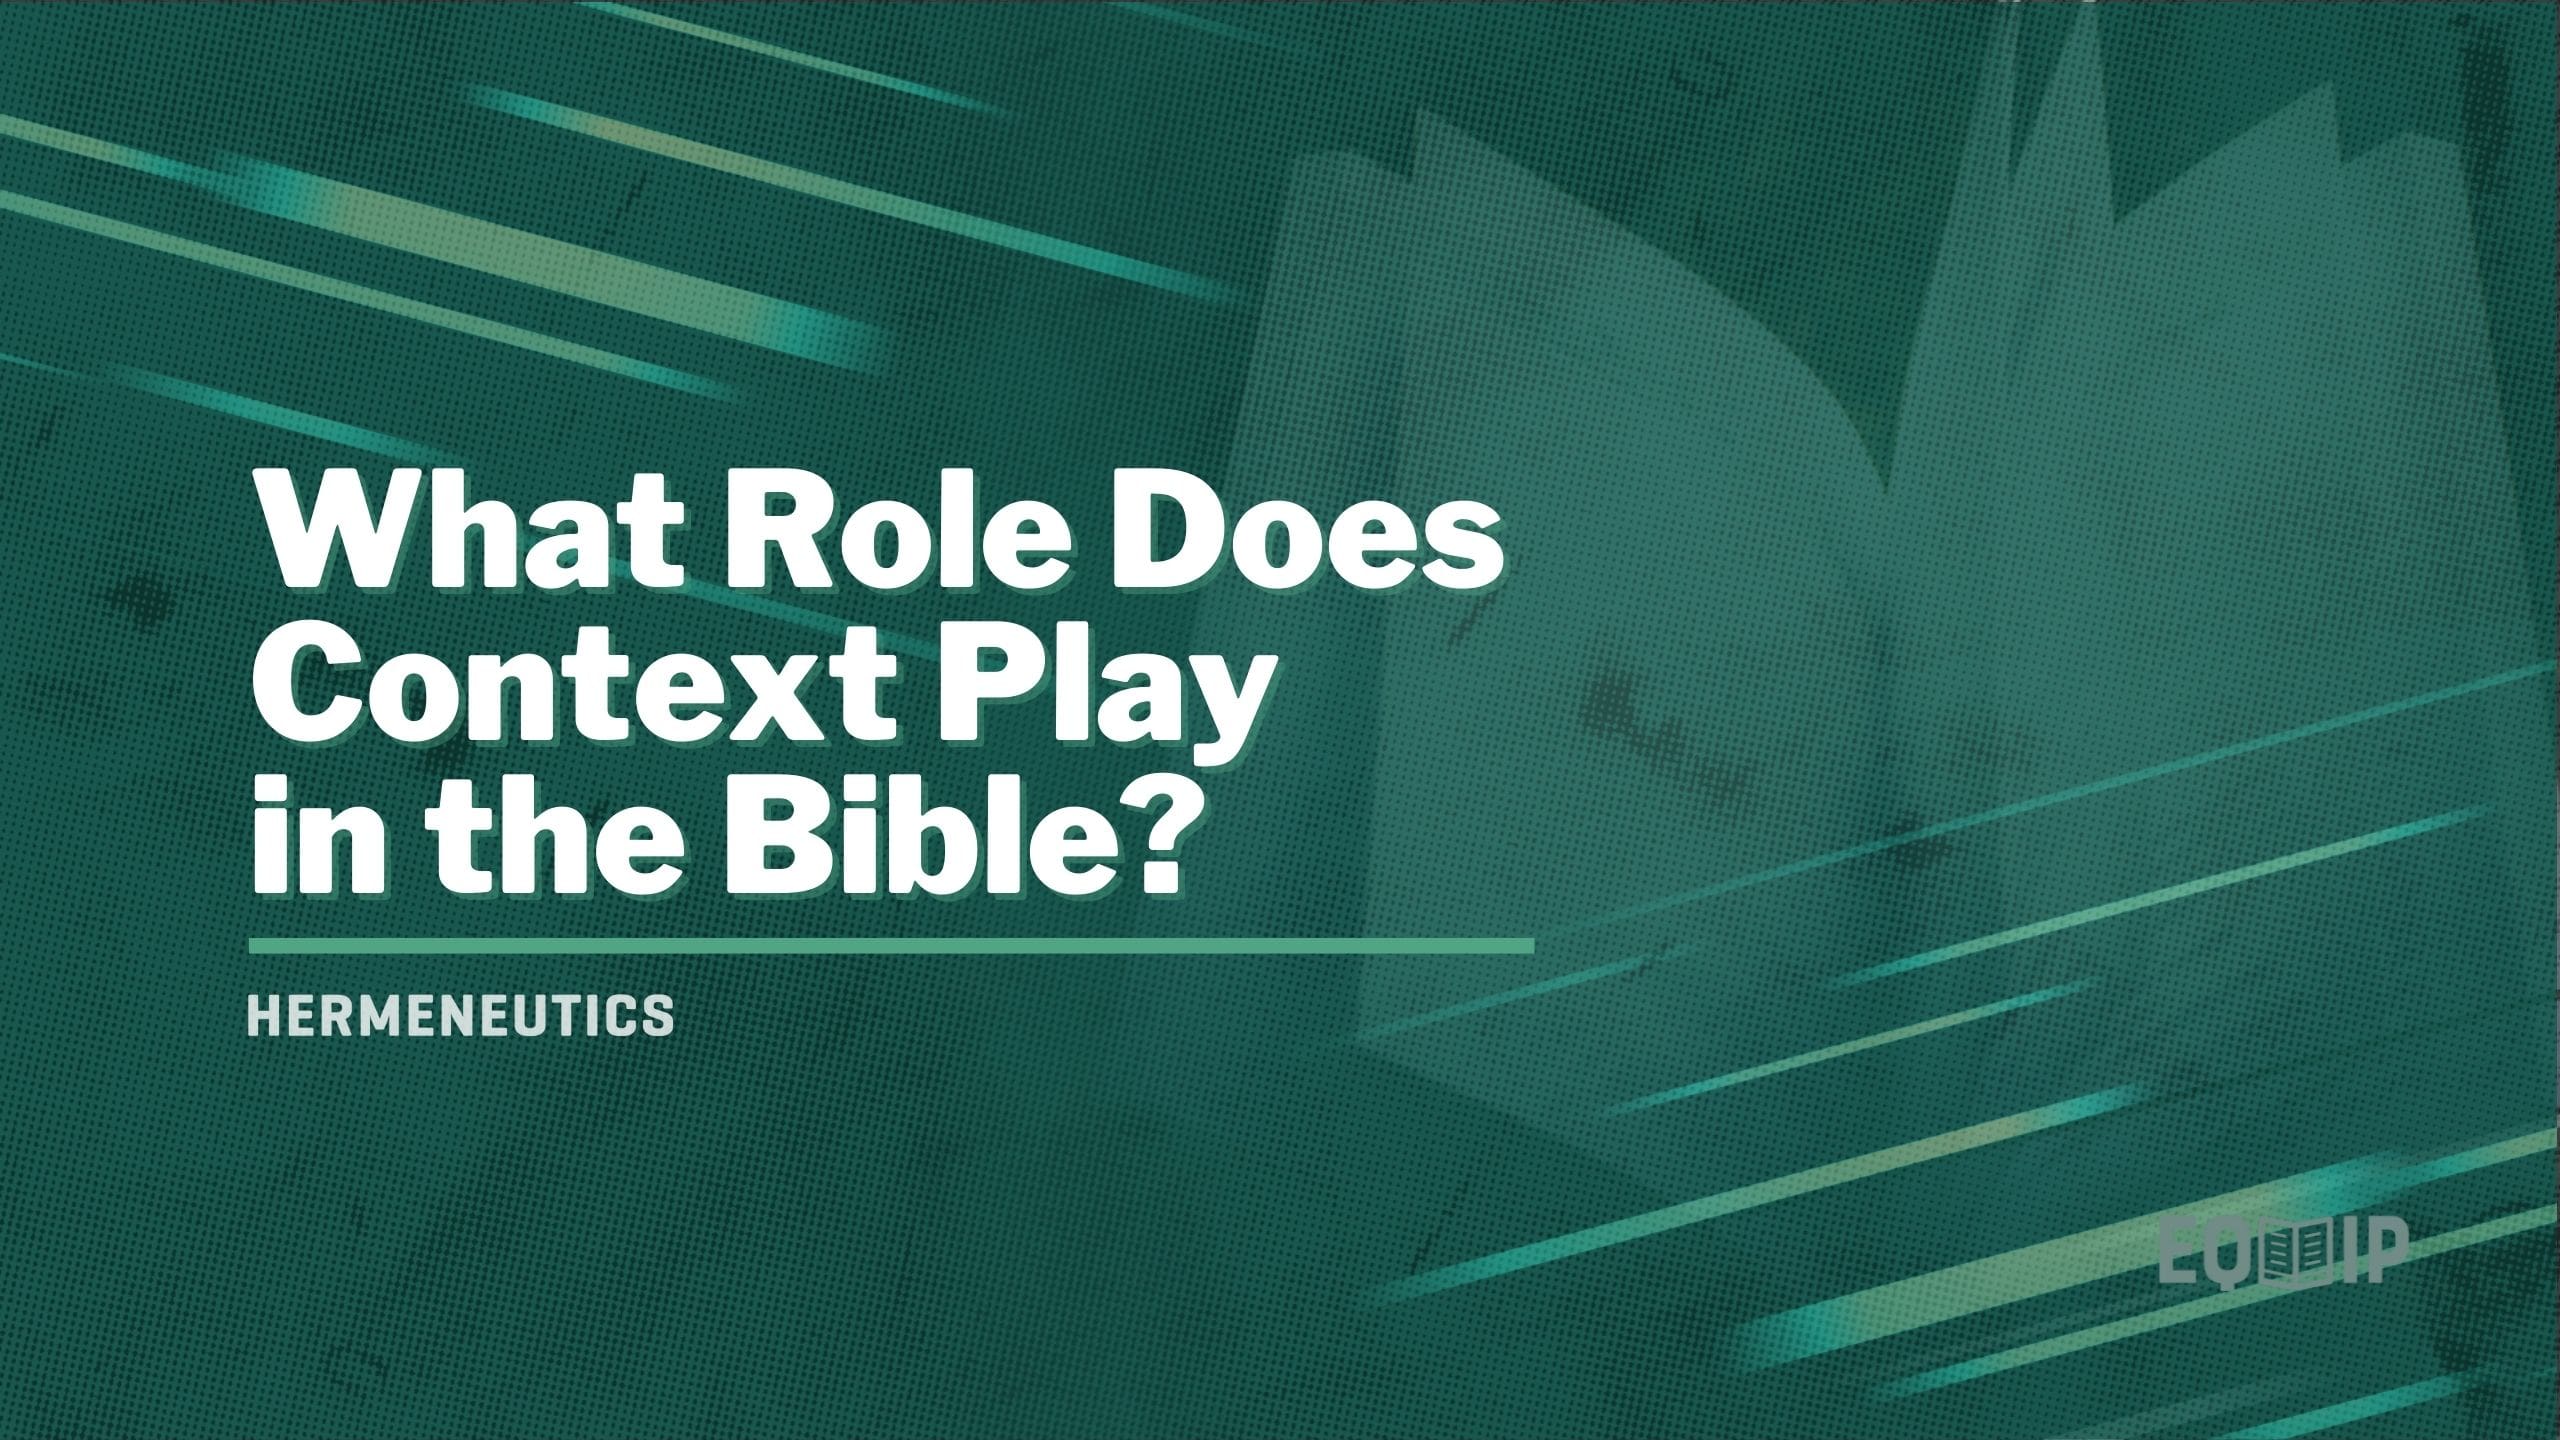 What Role Does Context Play in the Bible?